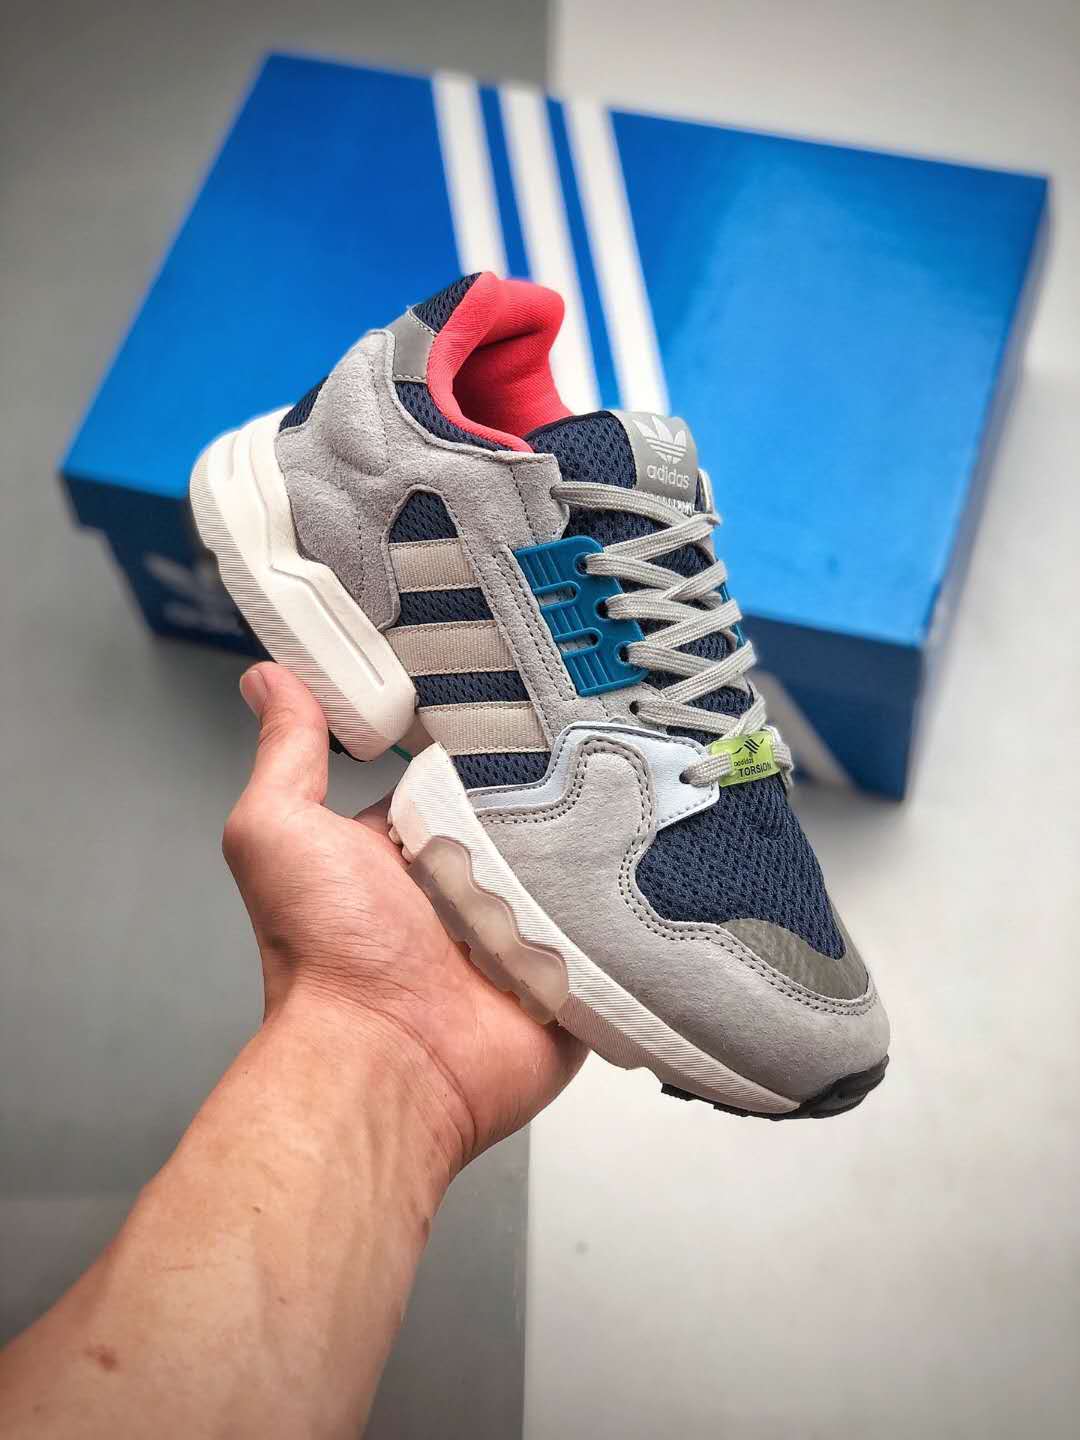 Adidas ZX Torsion Collegiate Navy Grey Two EE4845: Classic Style and Comfort